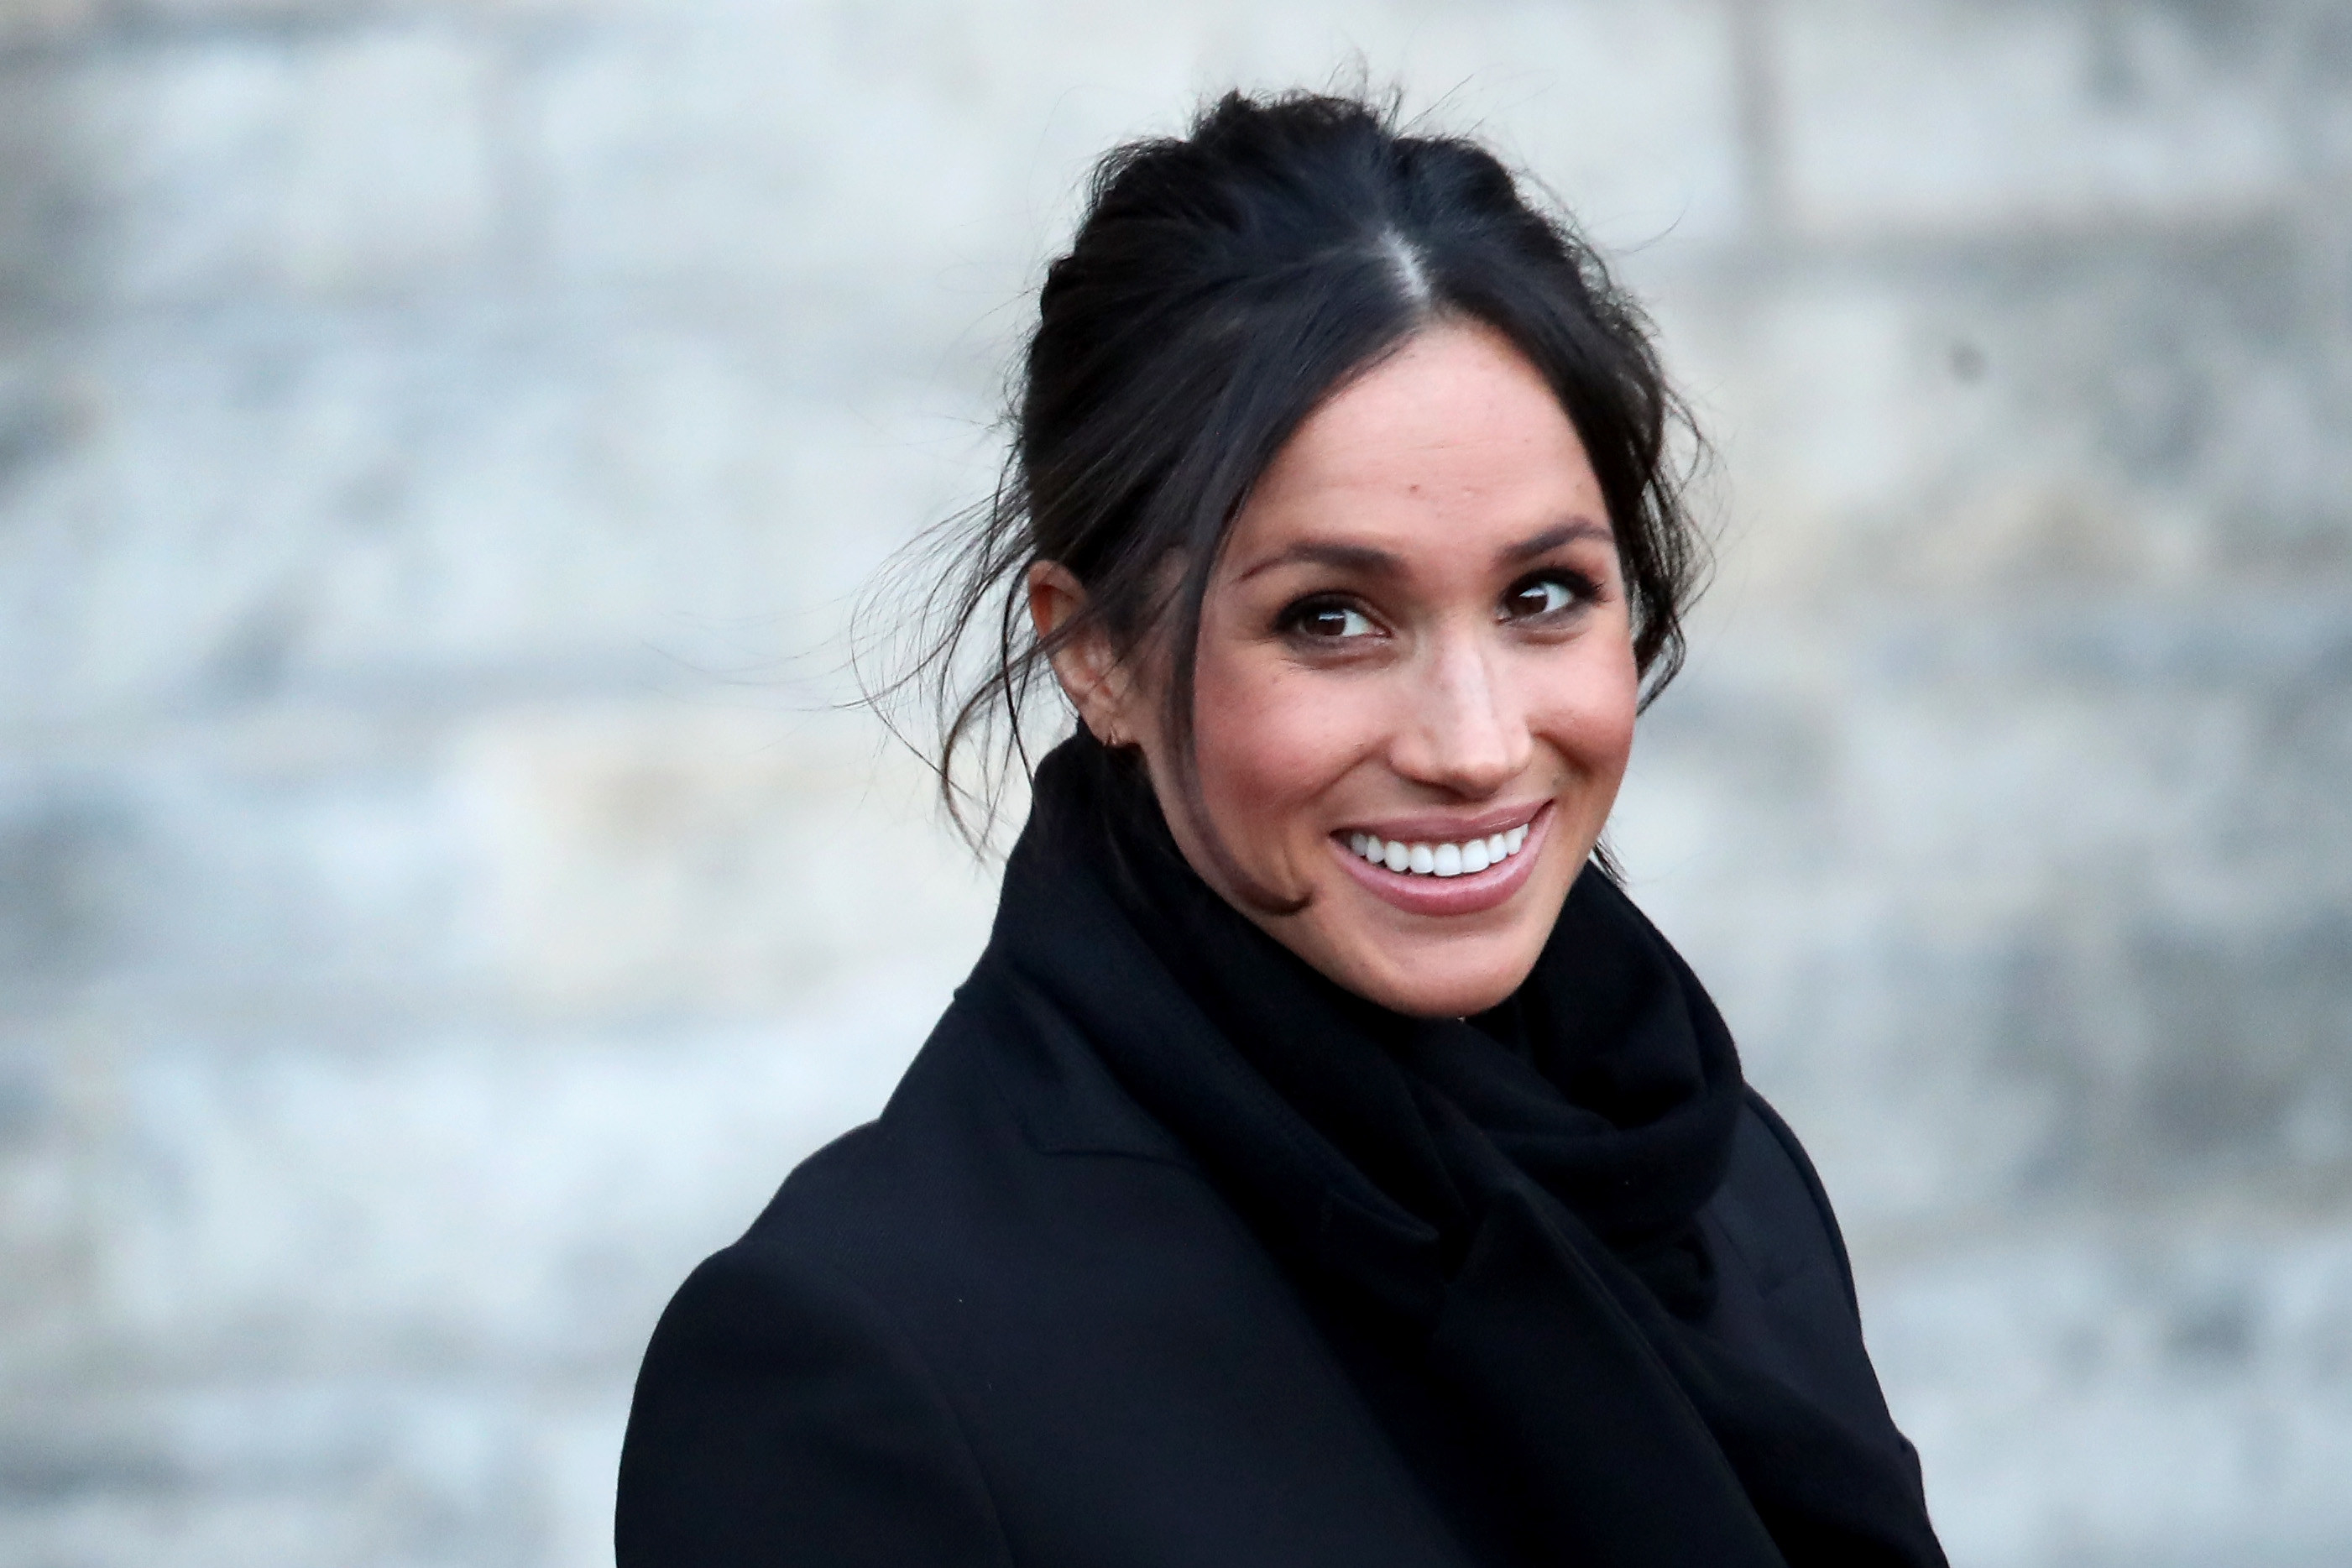 A close-up of Meghan smiling